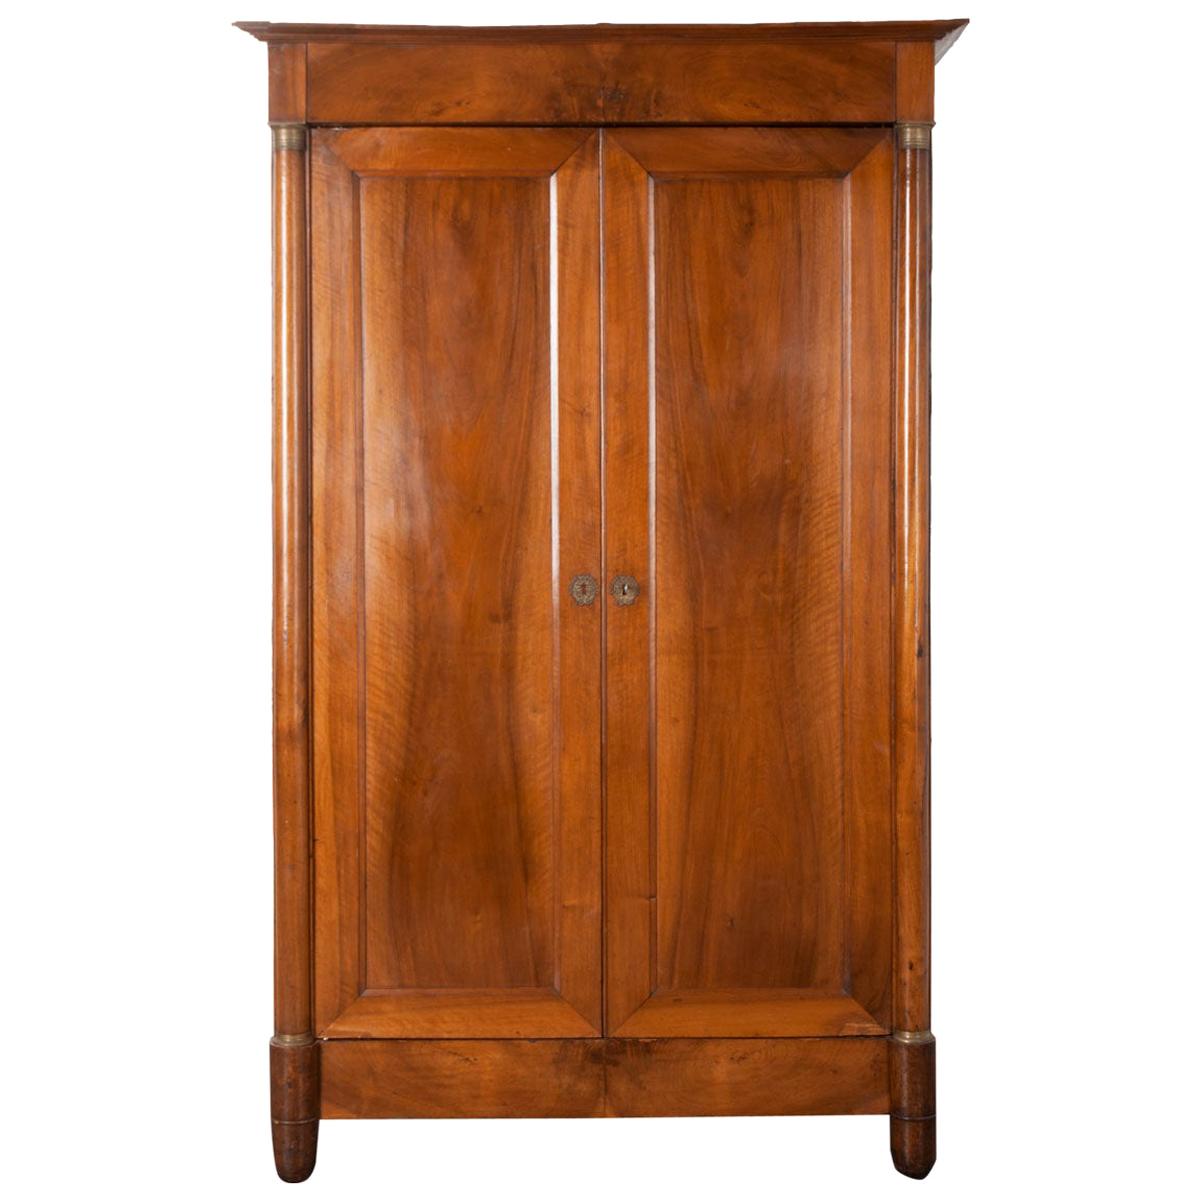 French 19th Century Empire-Style Armoire